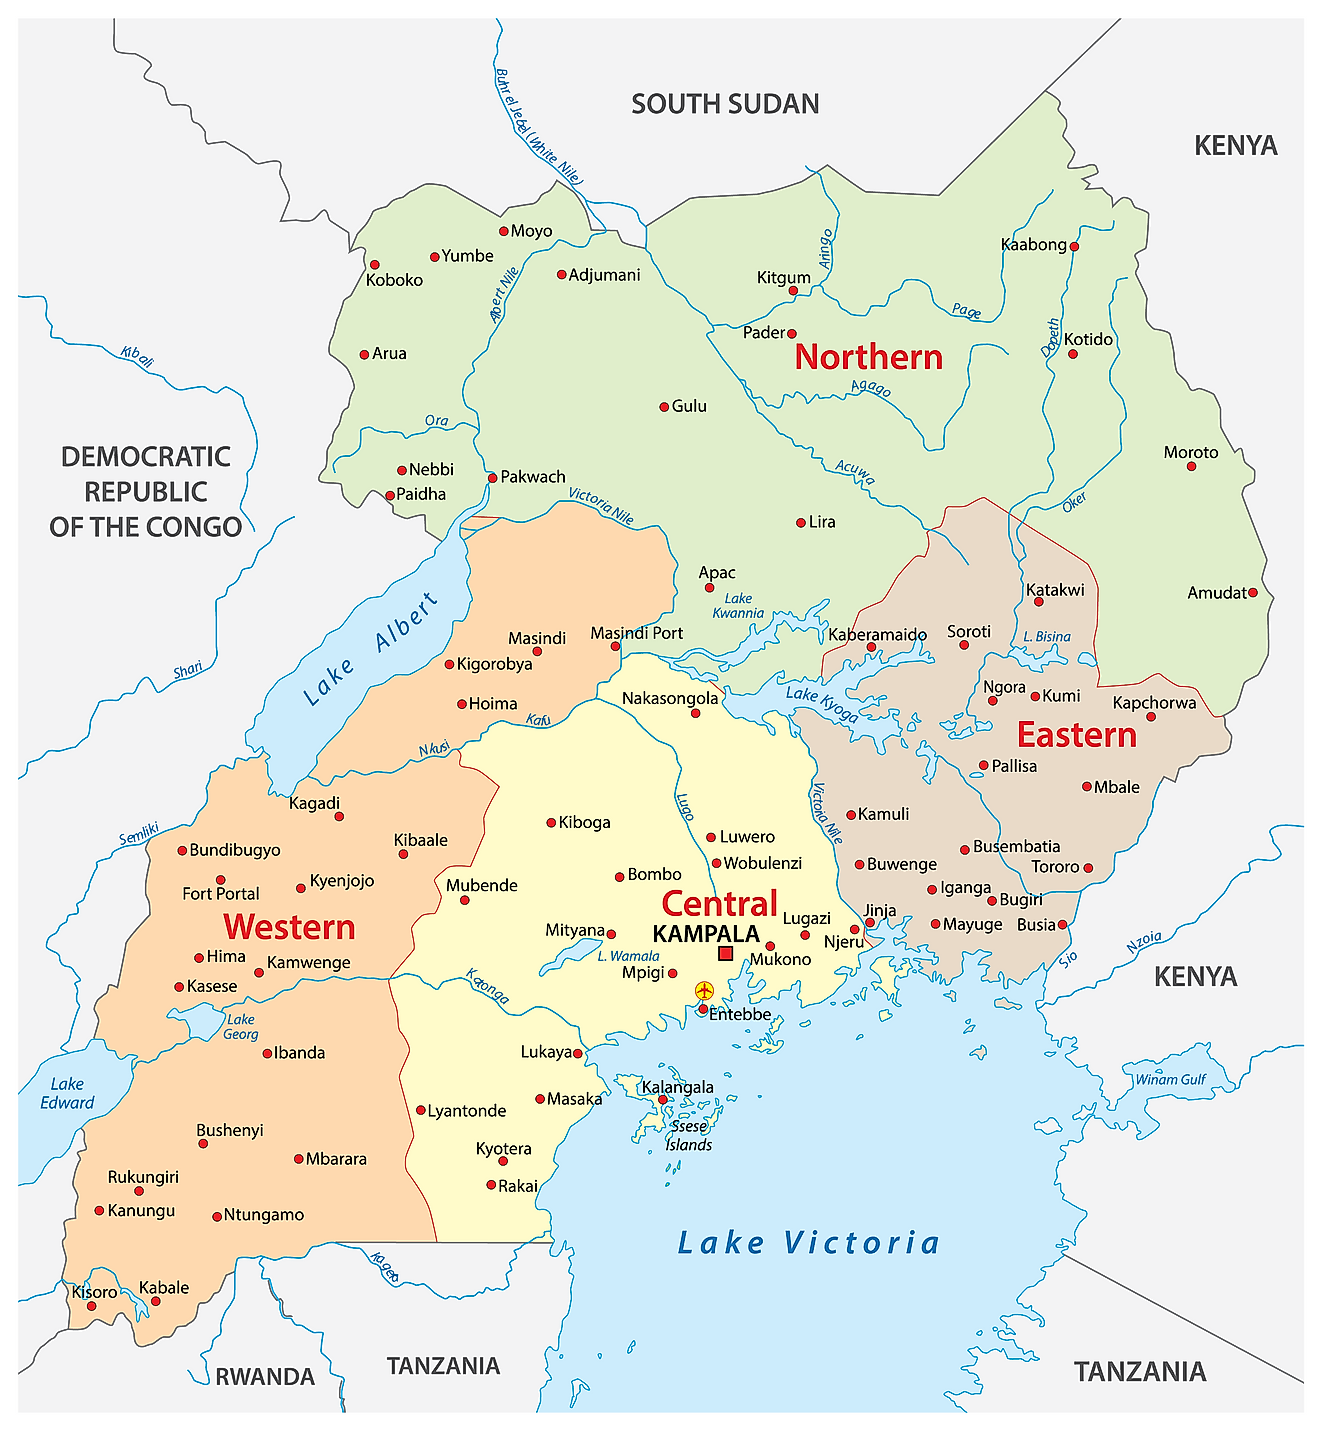 The Political Map of Uganda displaying its four major regions, their capital cities, and the national capital of Kampala.